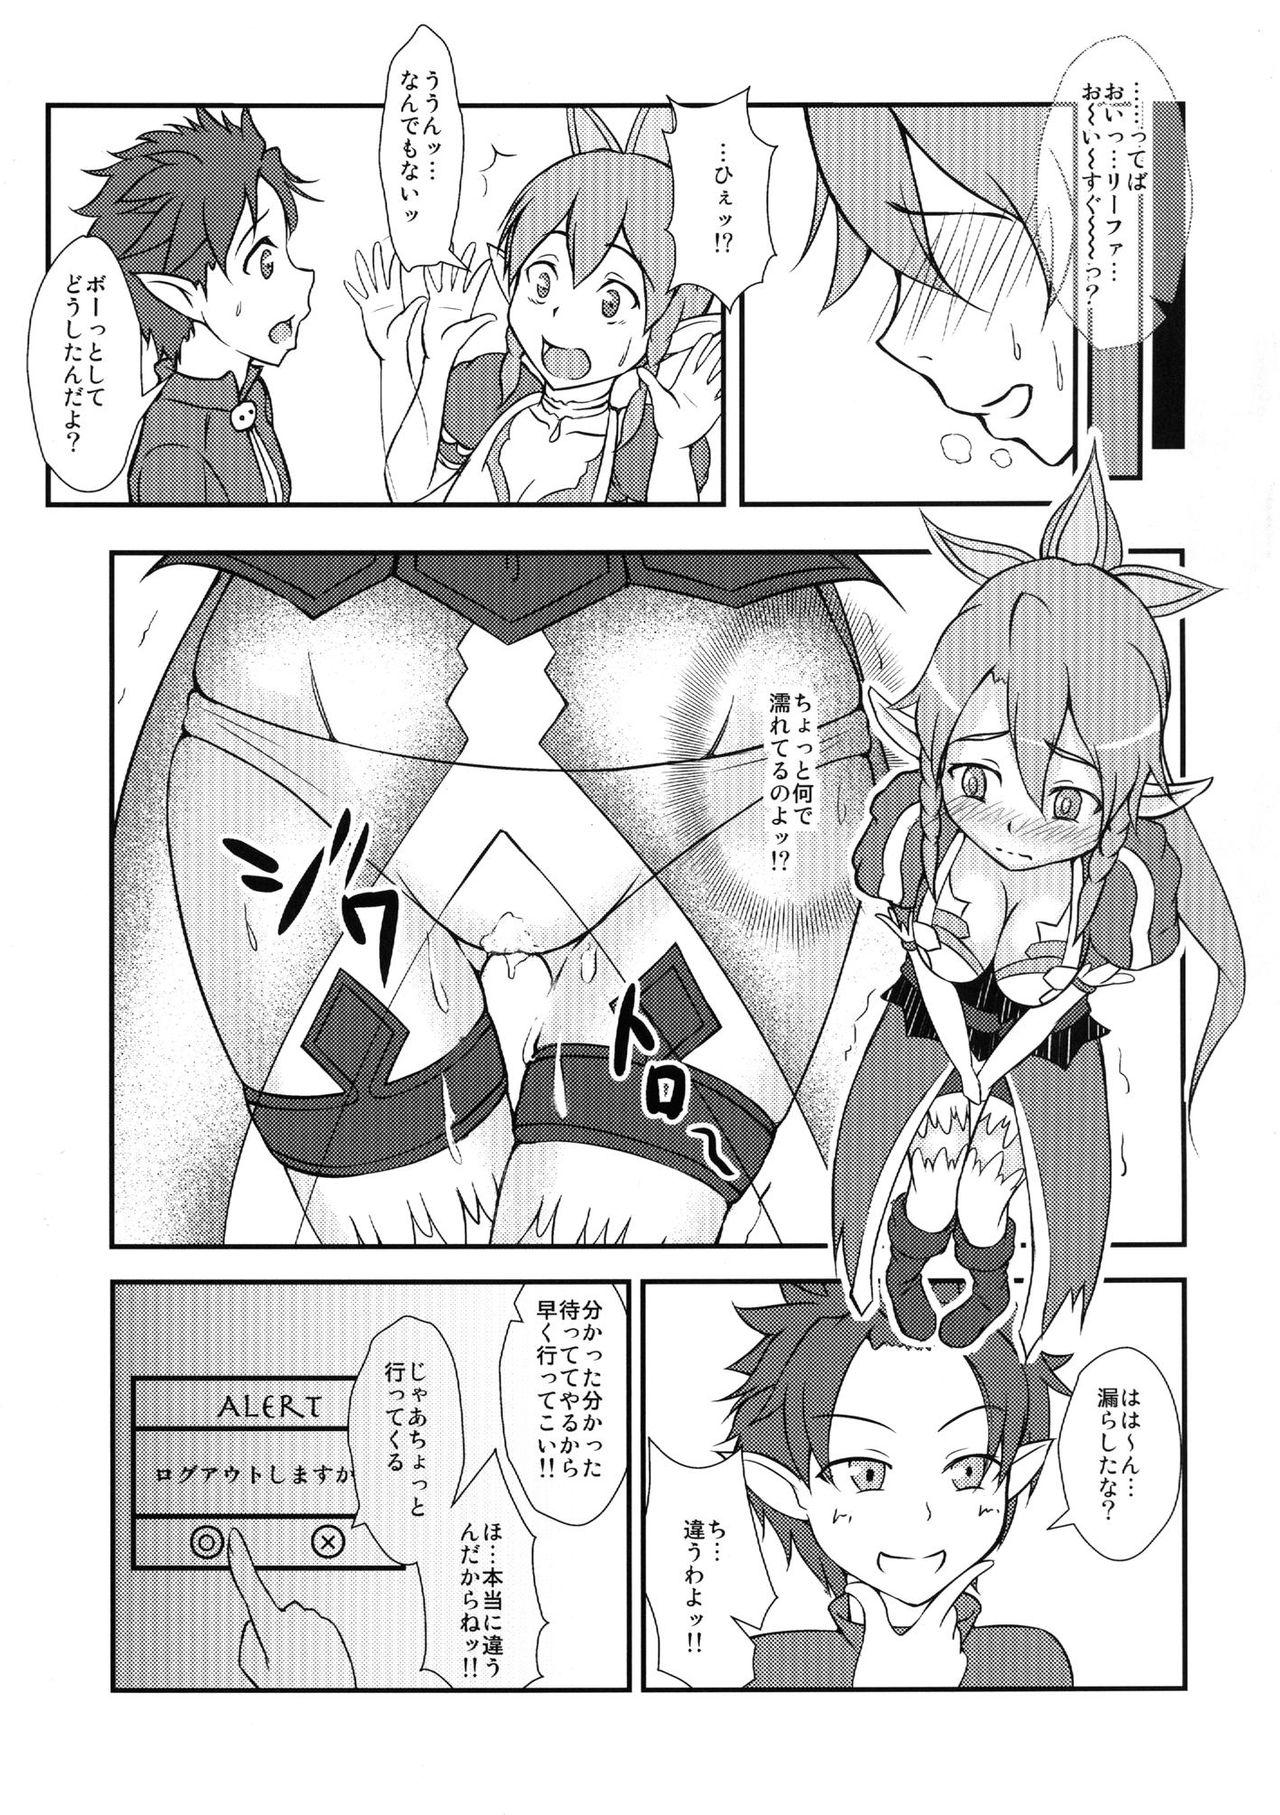 Candid Sneer And Orders - Sword art online Moan - Page 4